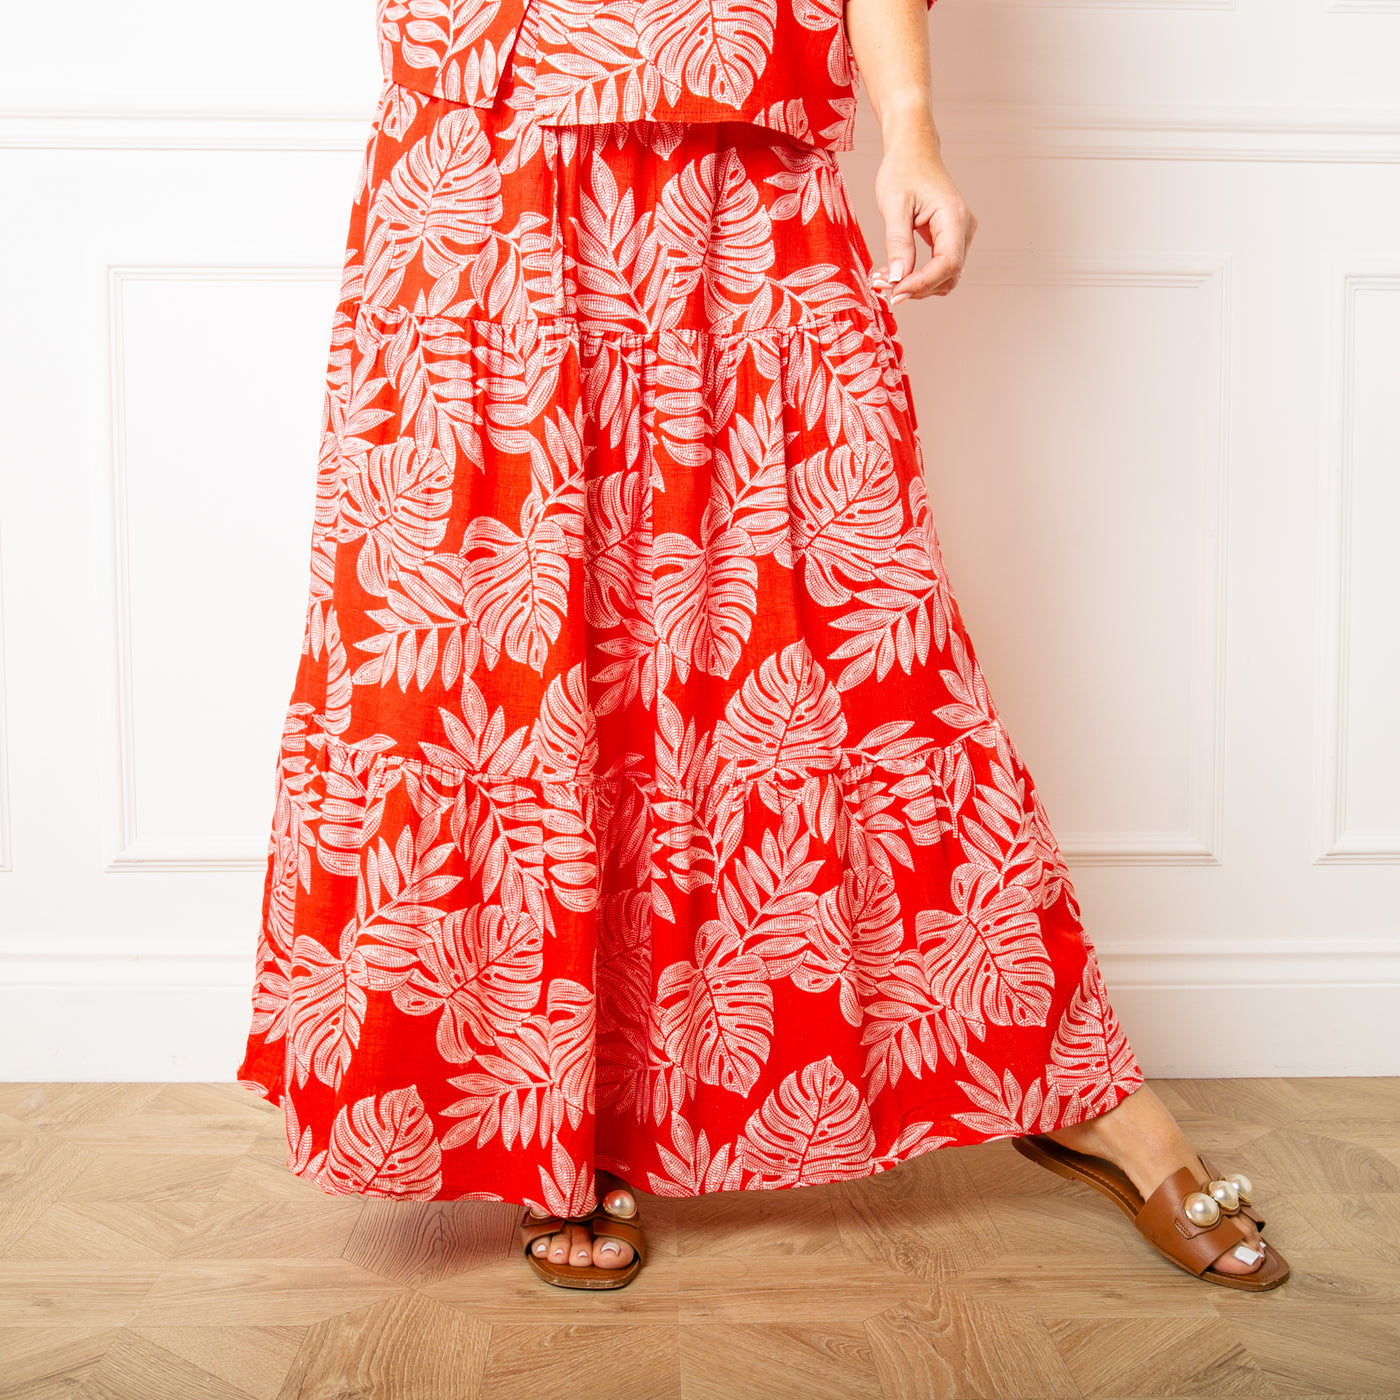 The red Linen Leaf Tiered Skirt in a maxi skirt length with a tiered silhouette